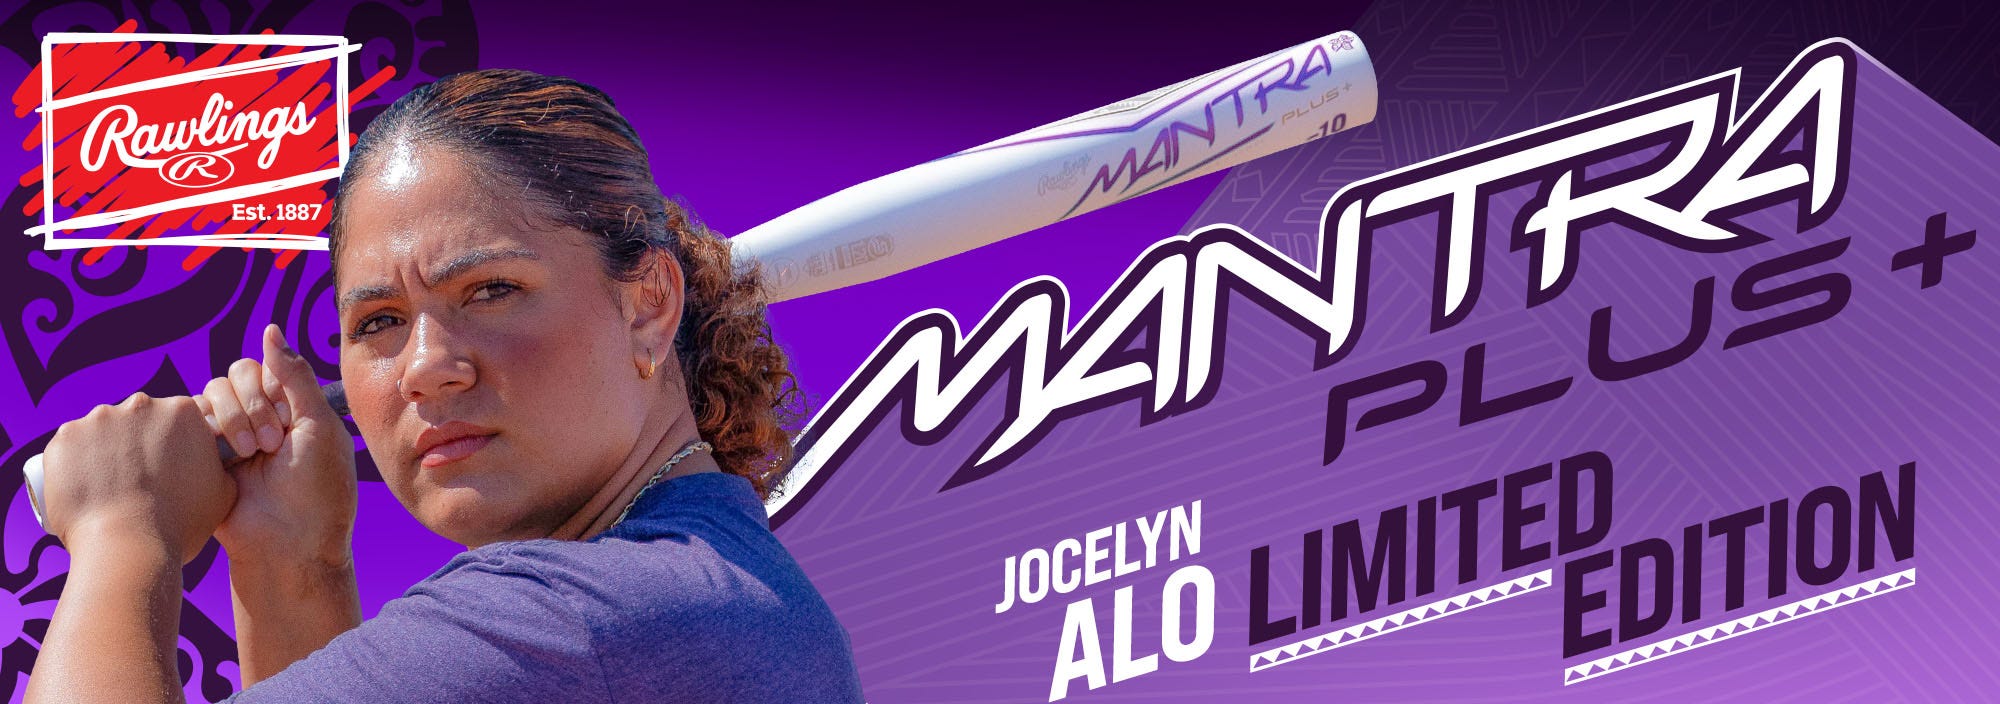 Now Available: Mantra Plus Fastpitch Bats